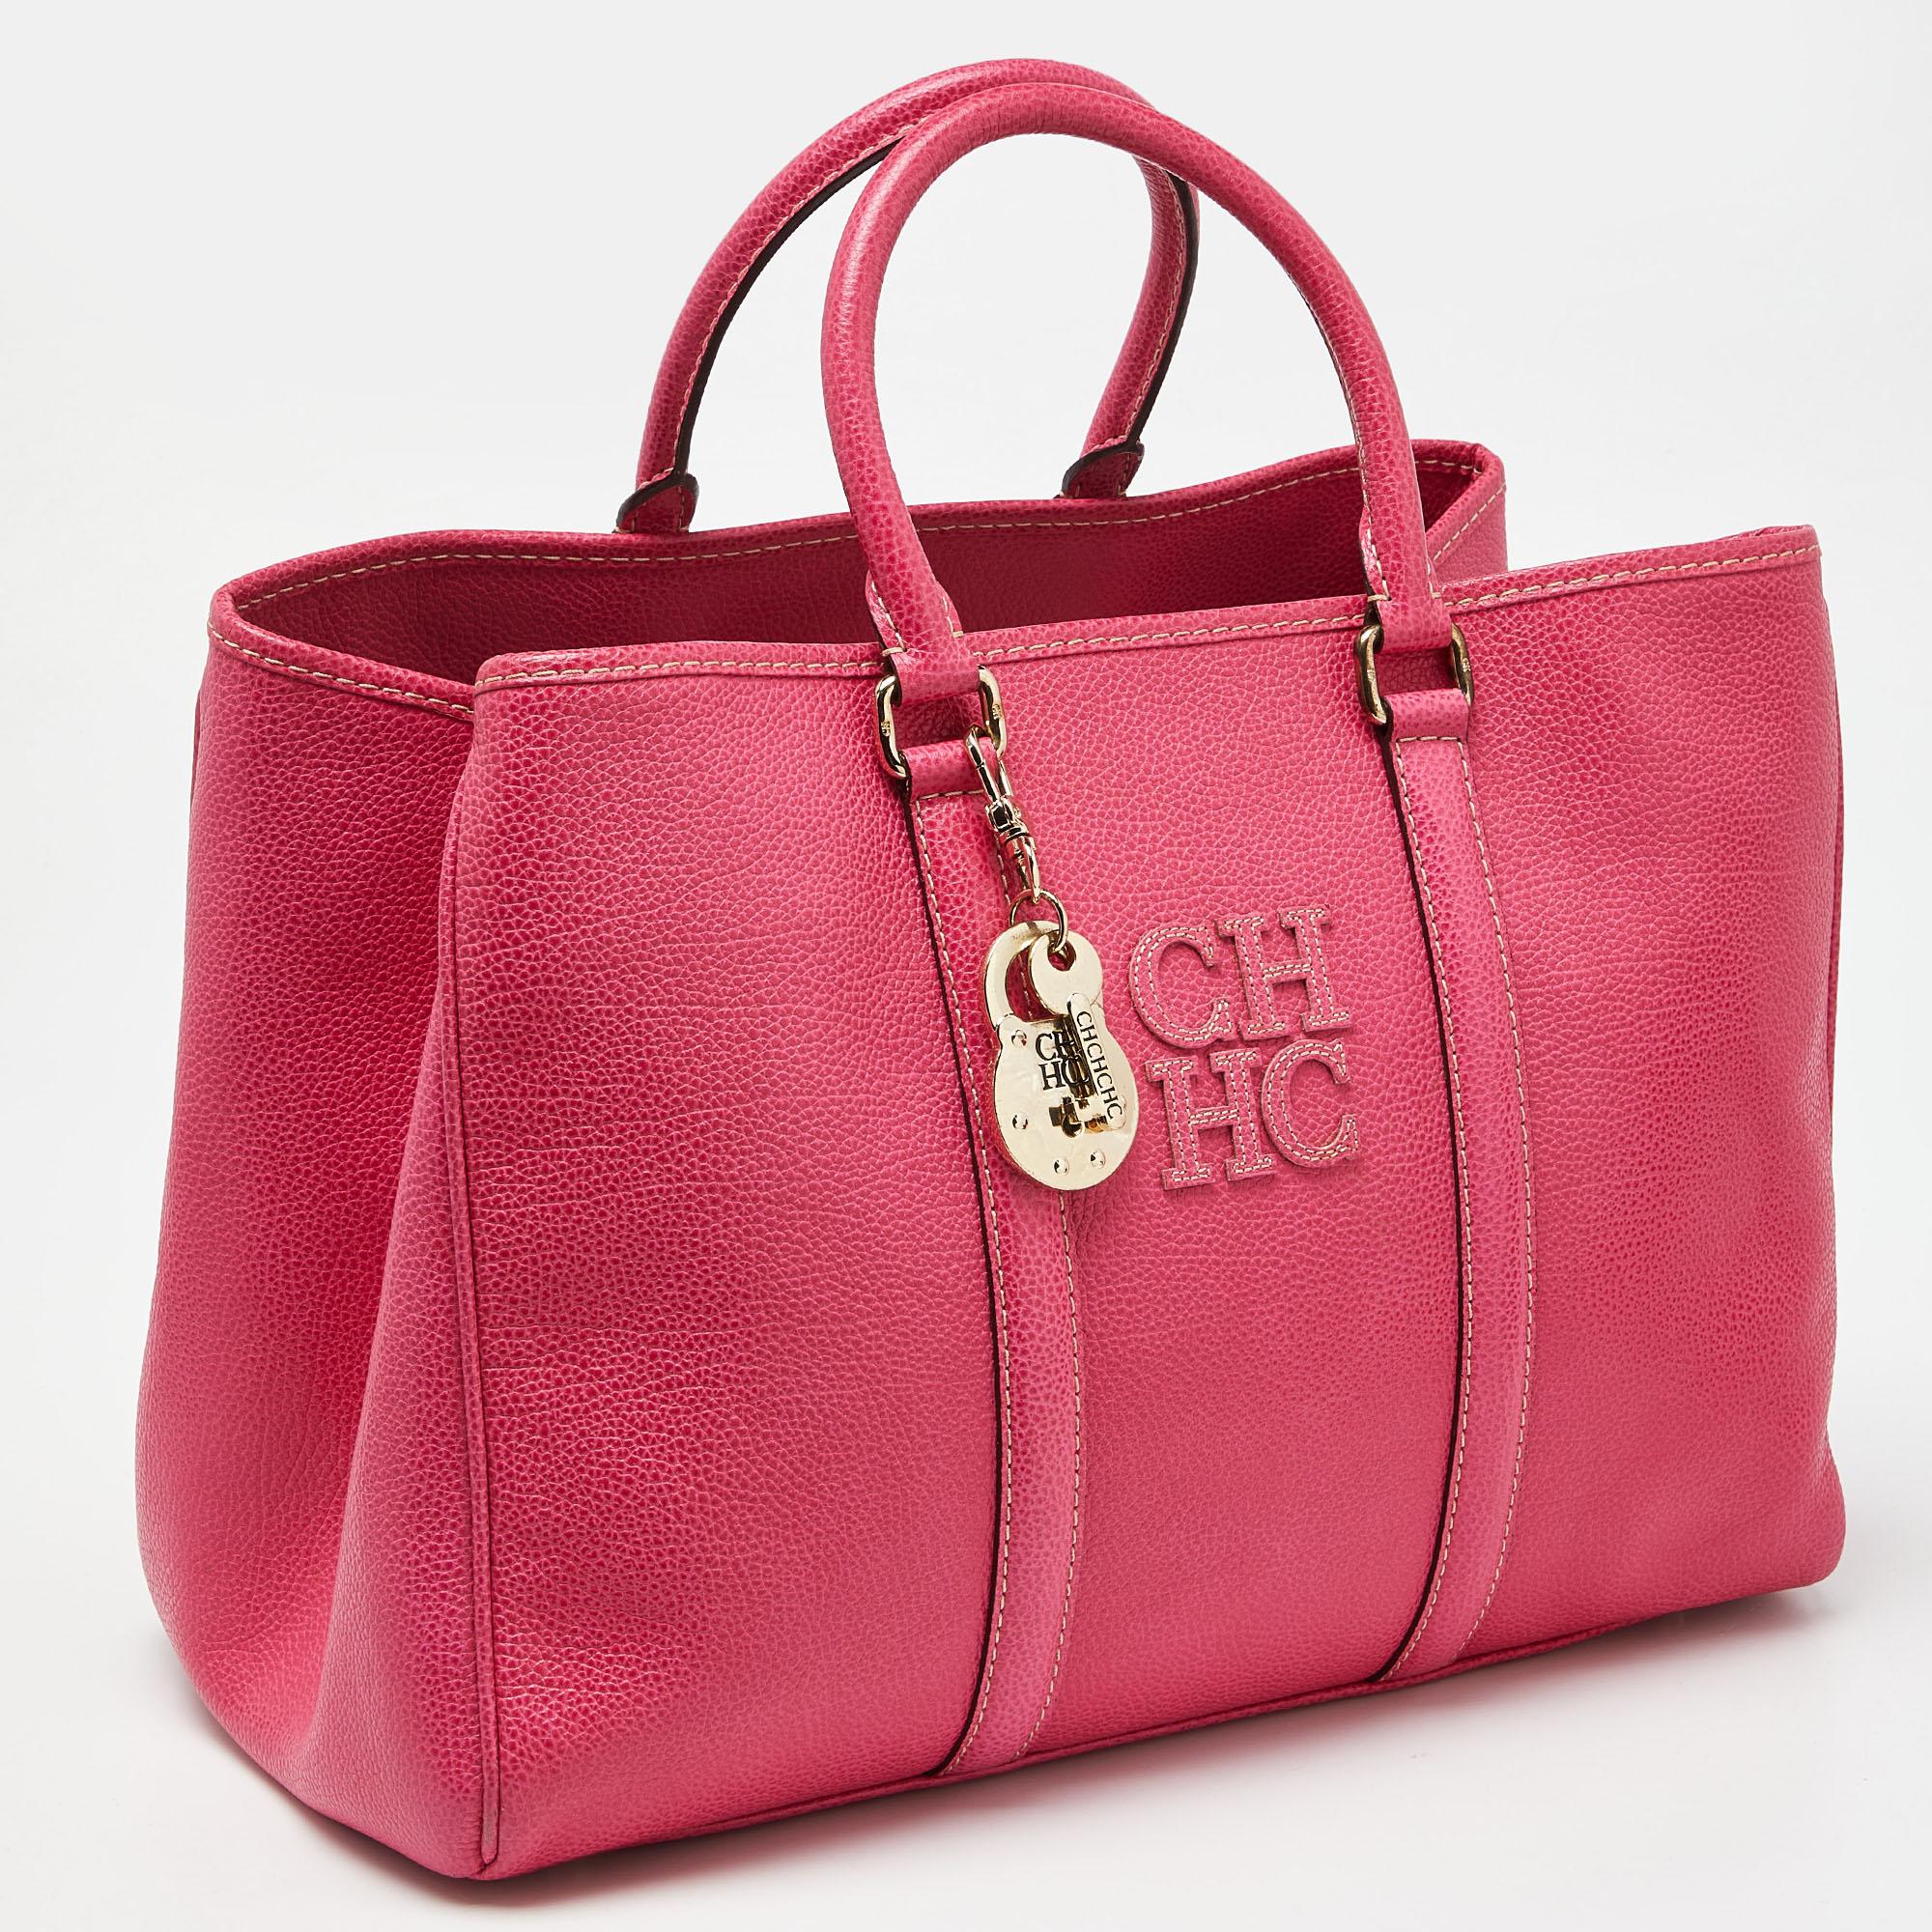 CH Carolina Herrera Pink Grained Leather Matteo Tote For Sale 1